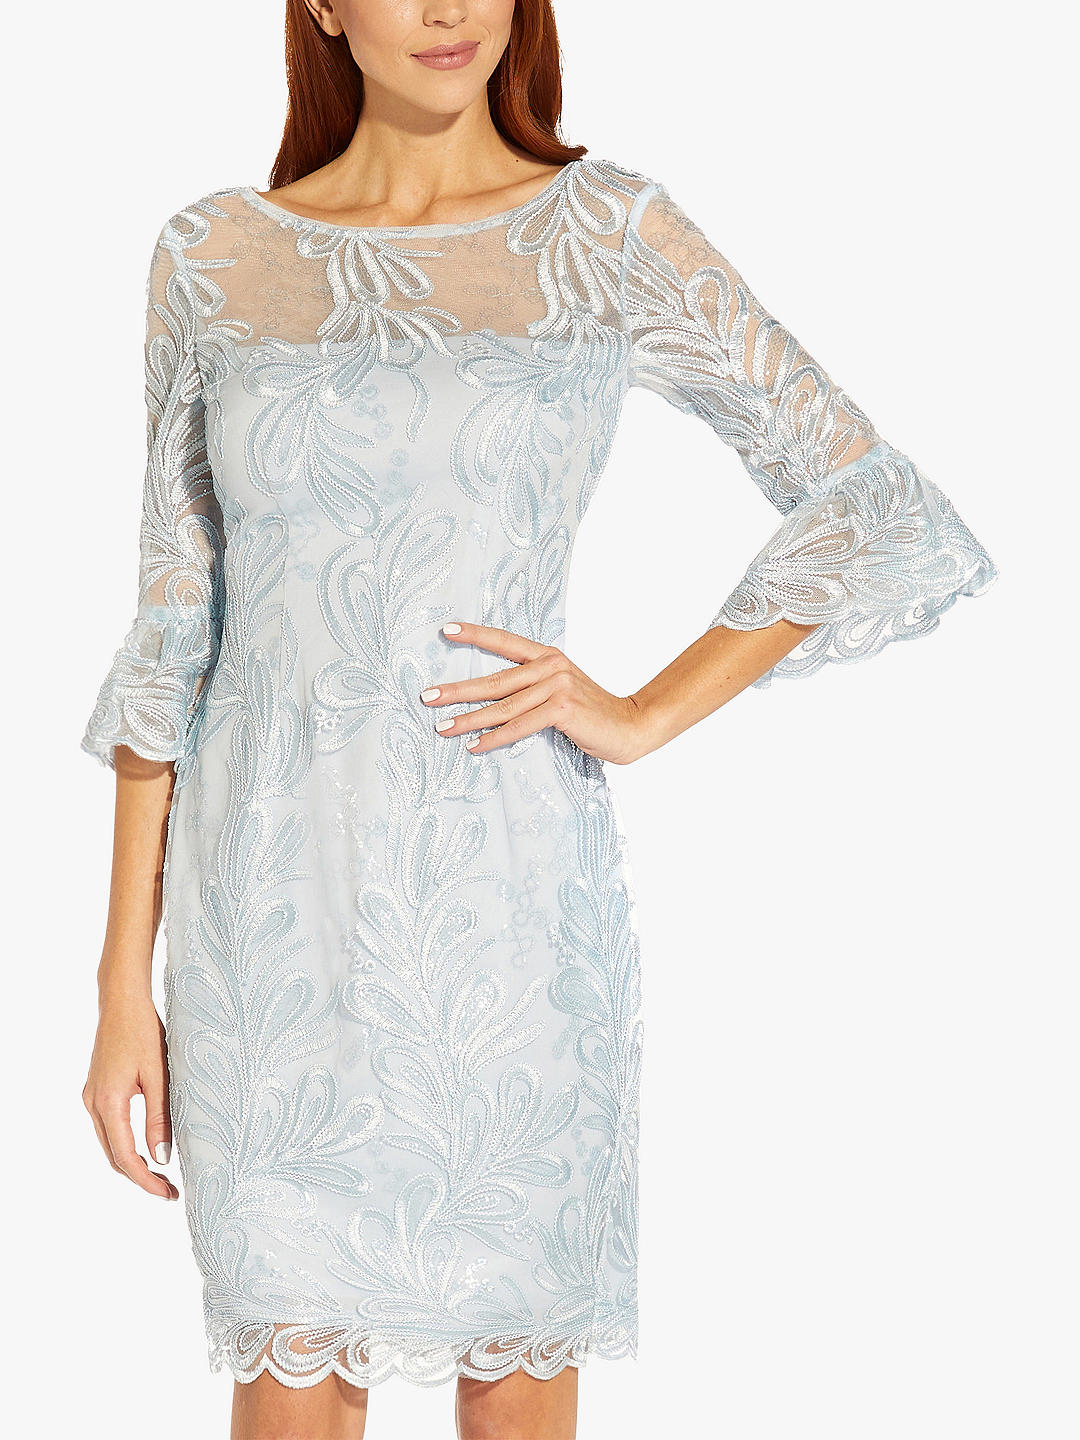 Adrianna Papell Embroidered Bell Sleeve Sheath Dress, Opal